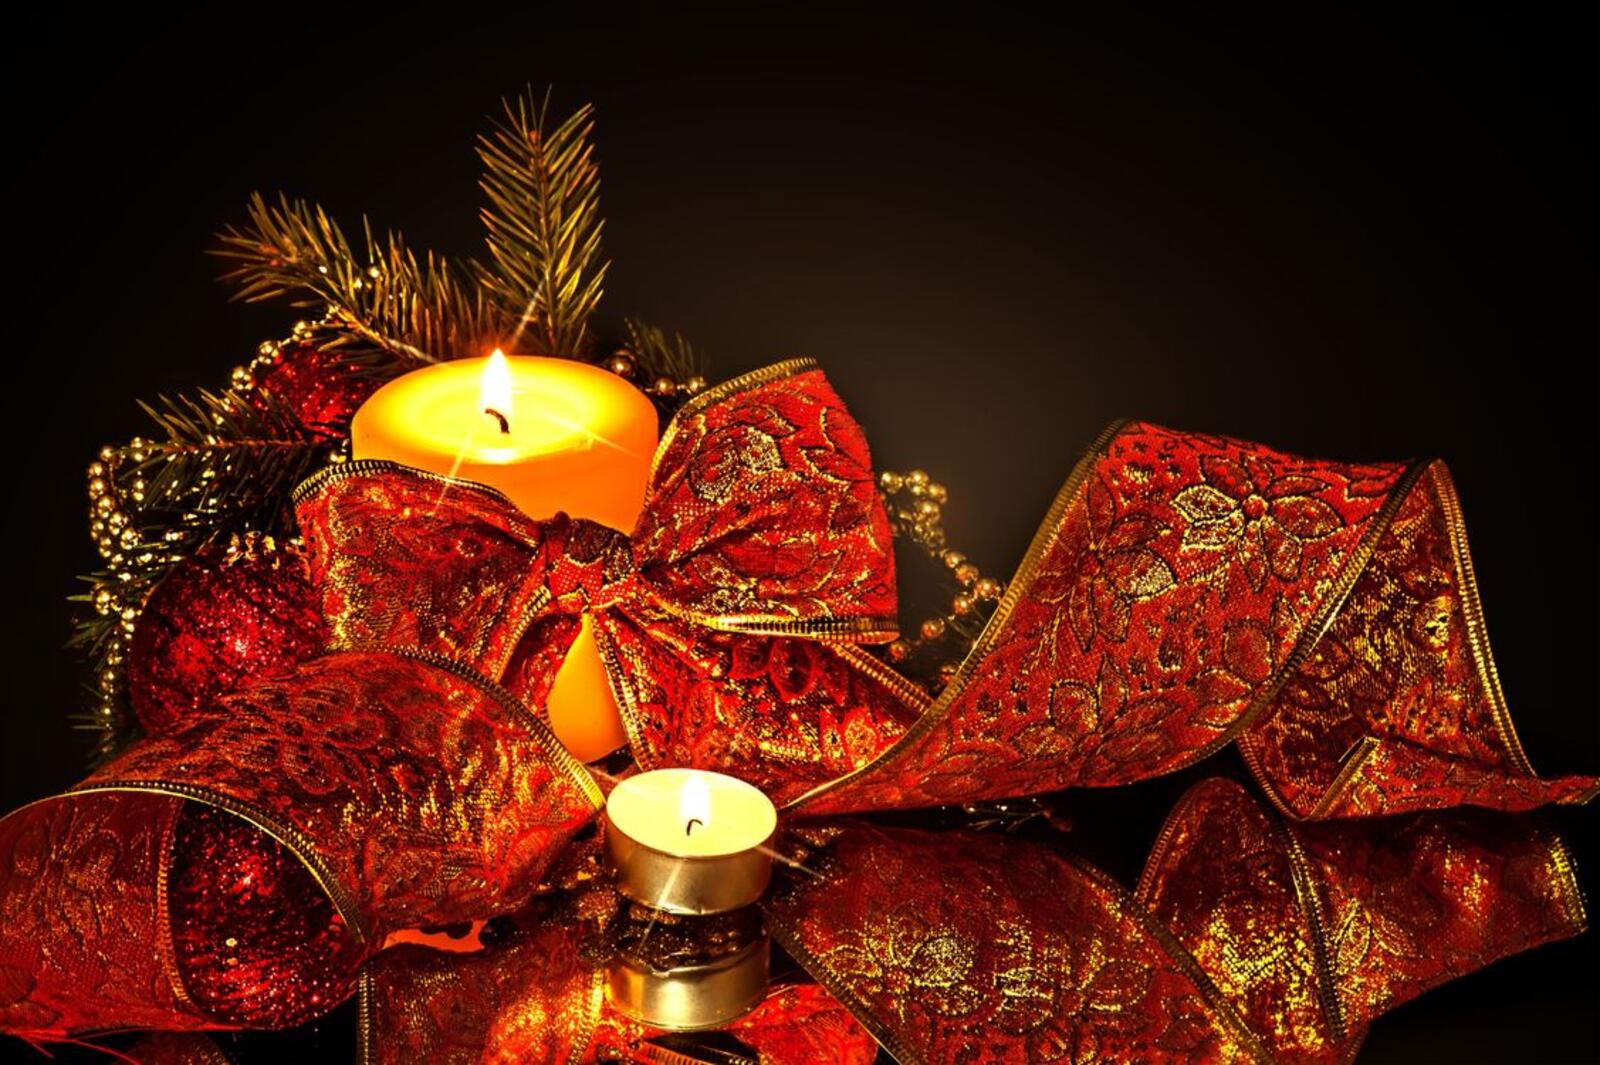 Wallpapers Christmas decorations fire New Year s style on the desktop